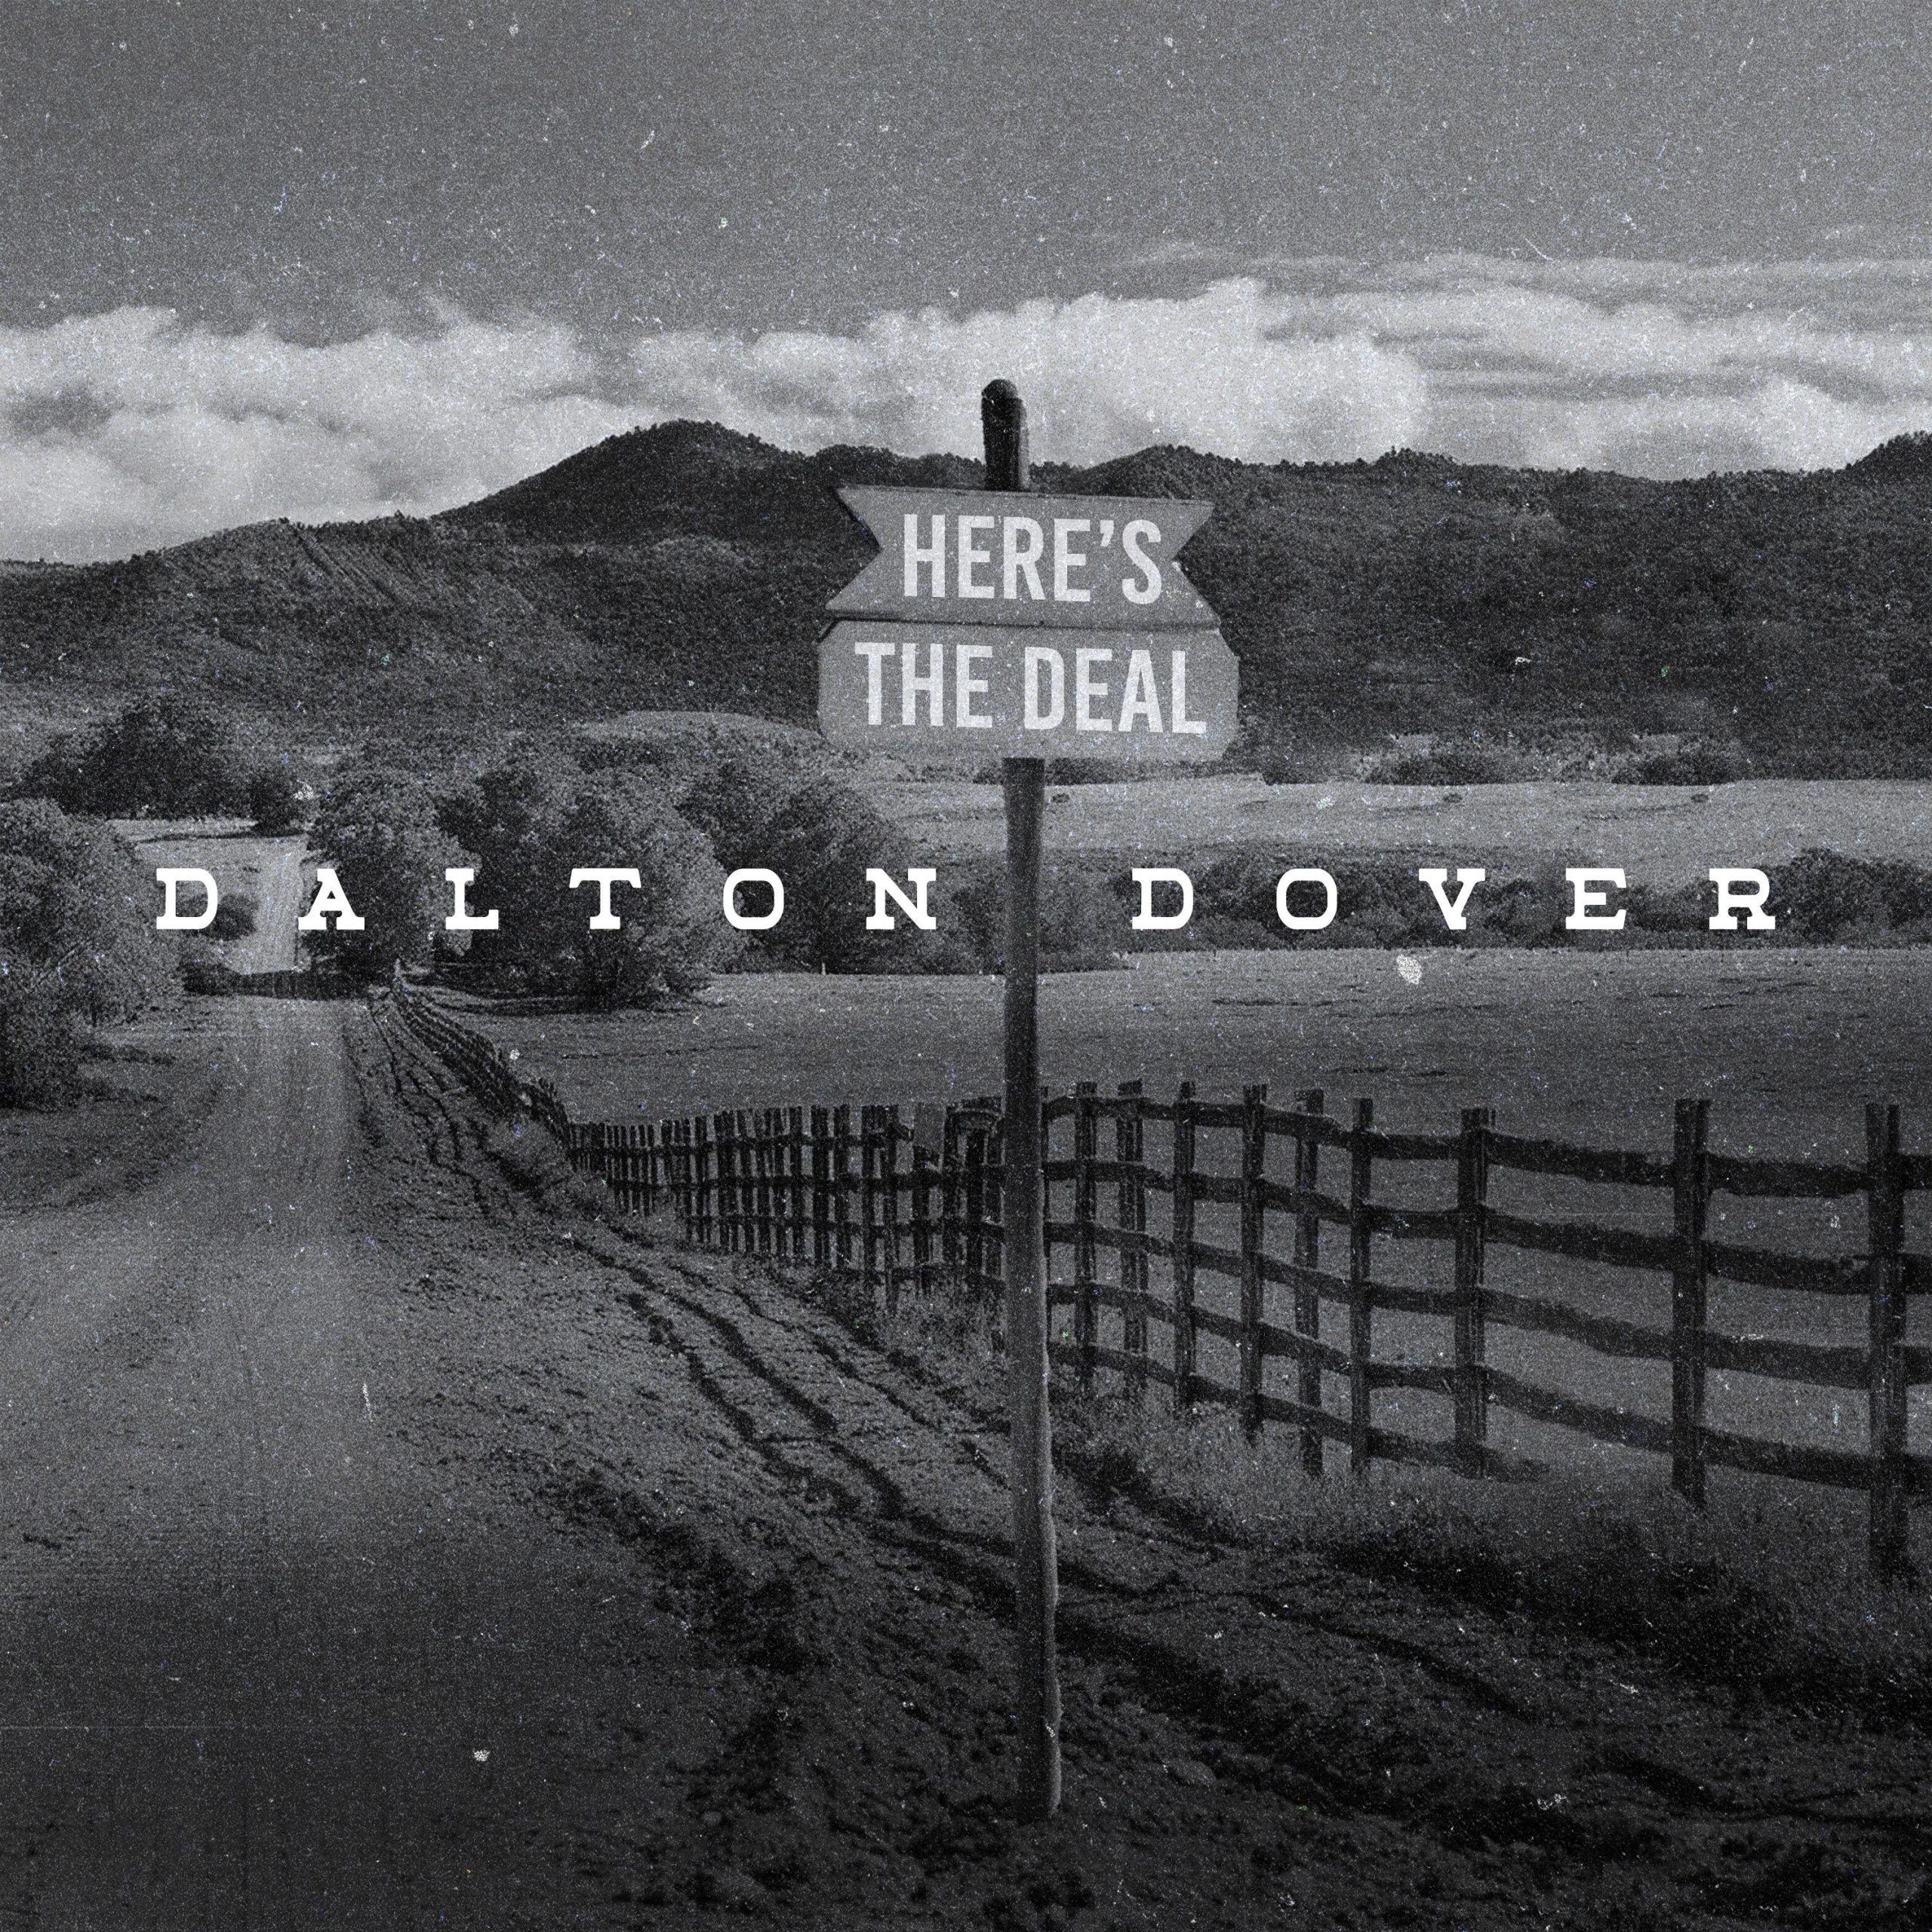 DALTON DOVER PAYS TRIBUTE TO ARAGON, GEORGIA WITH “HERE’S THE DEAL”